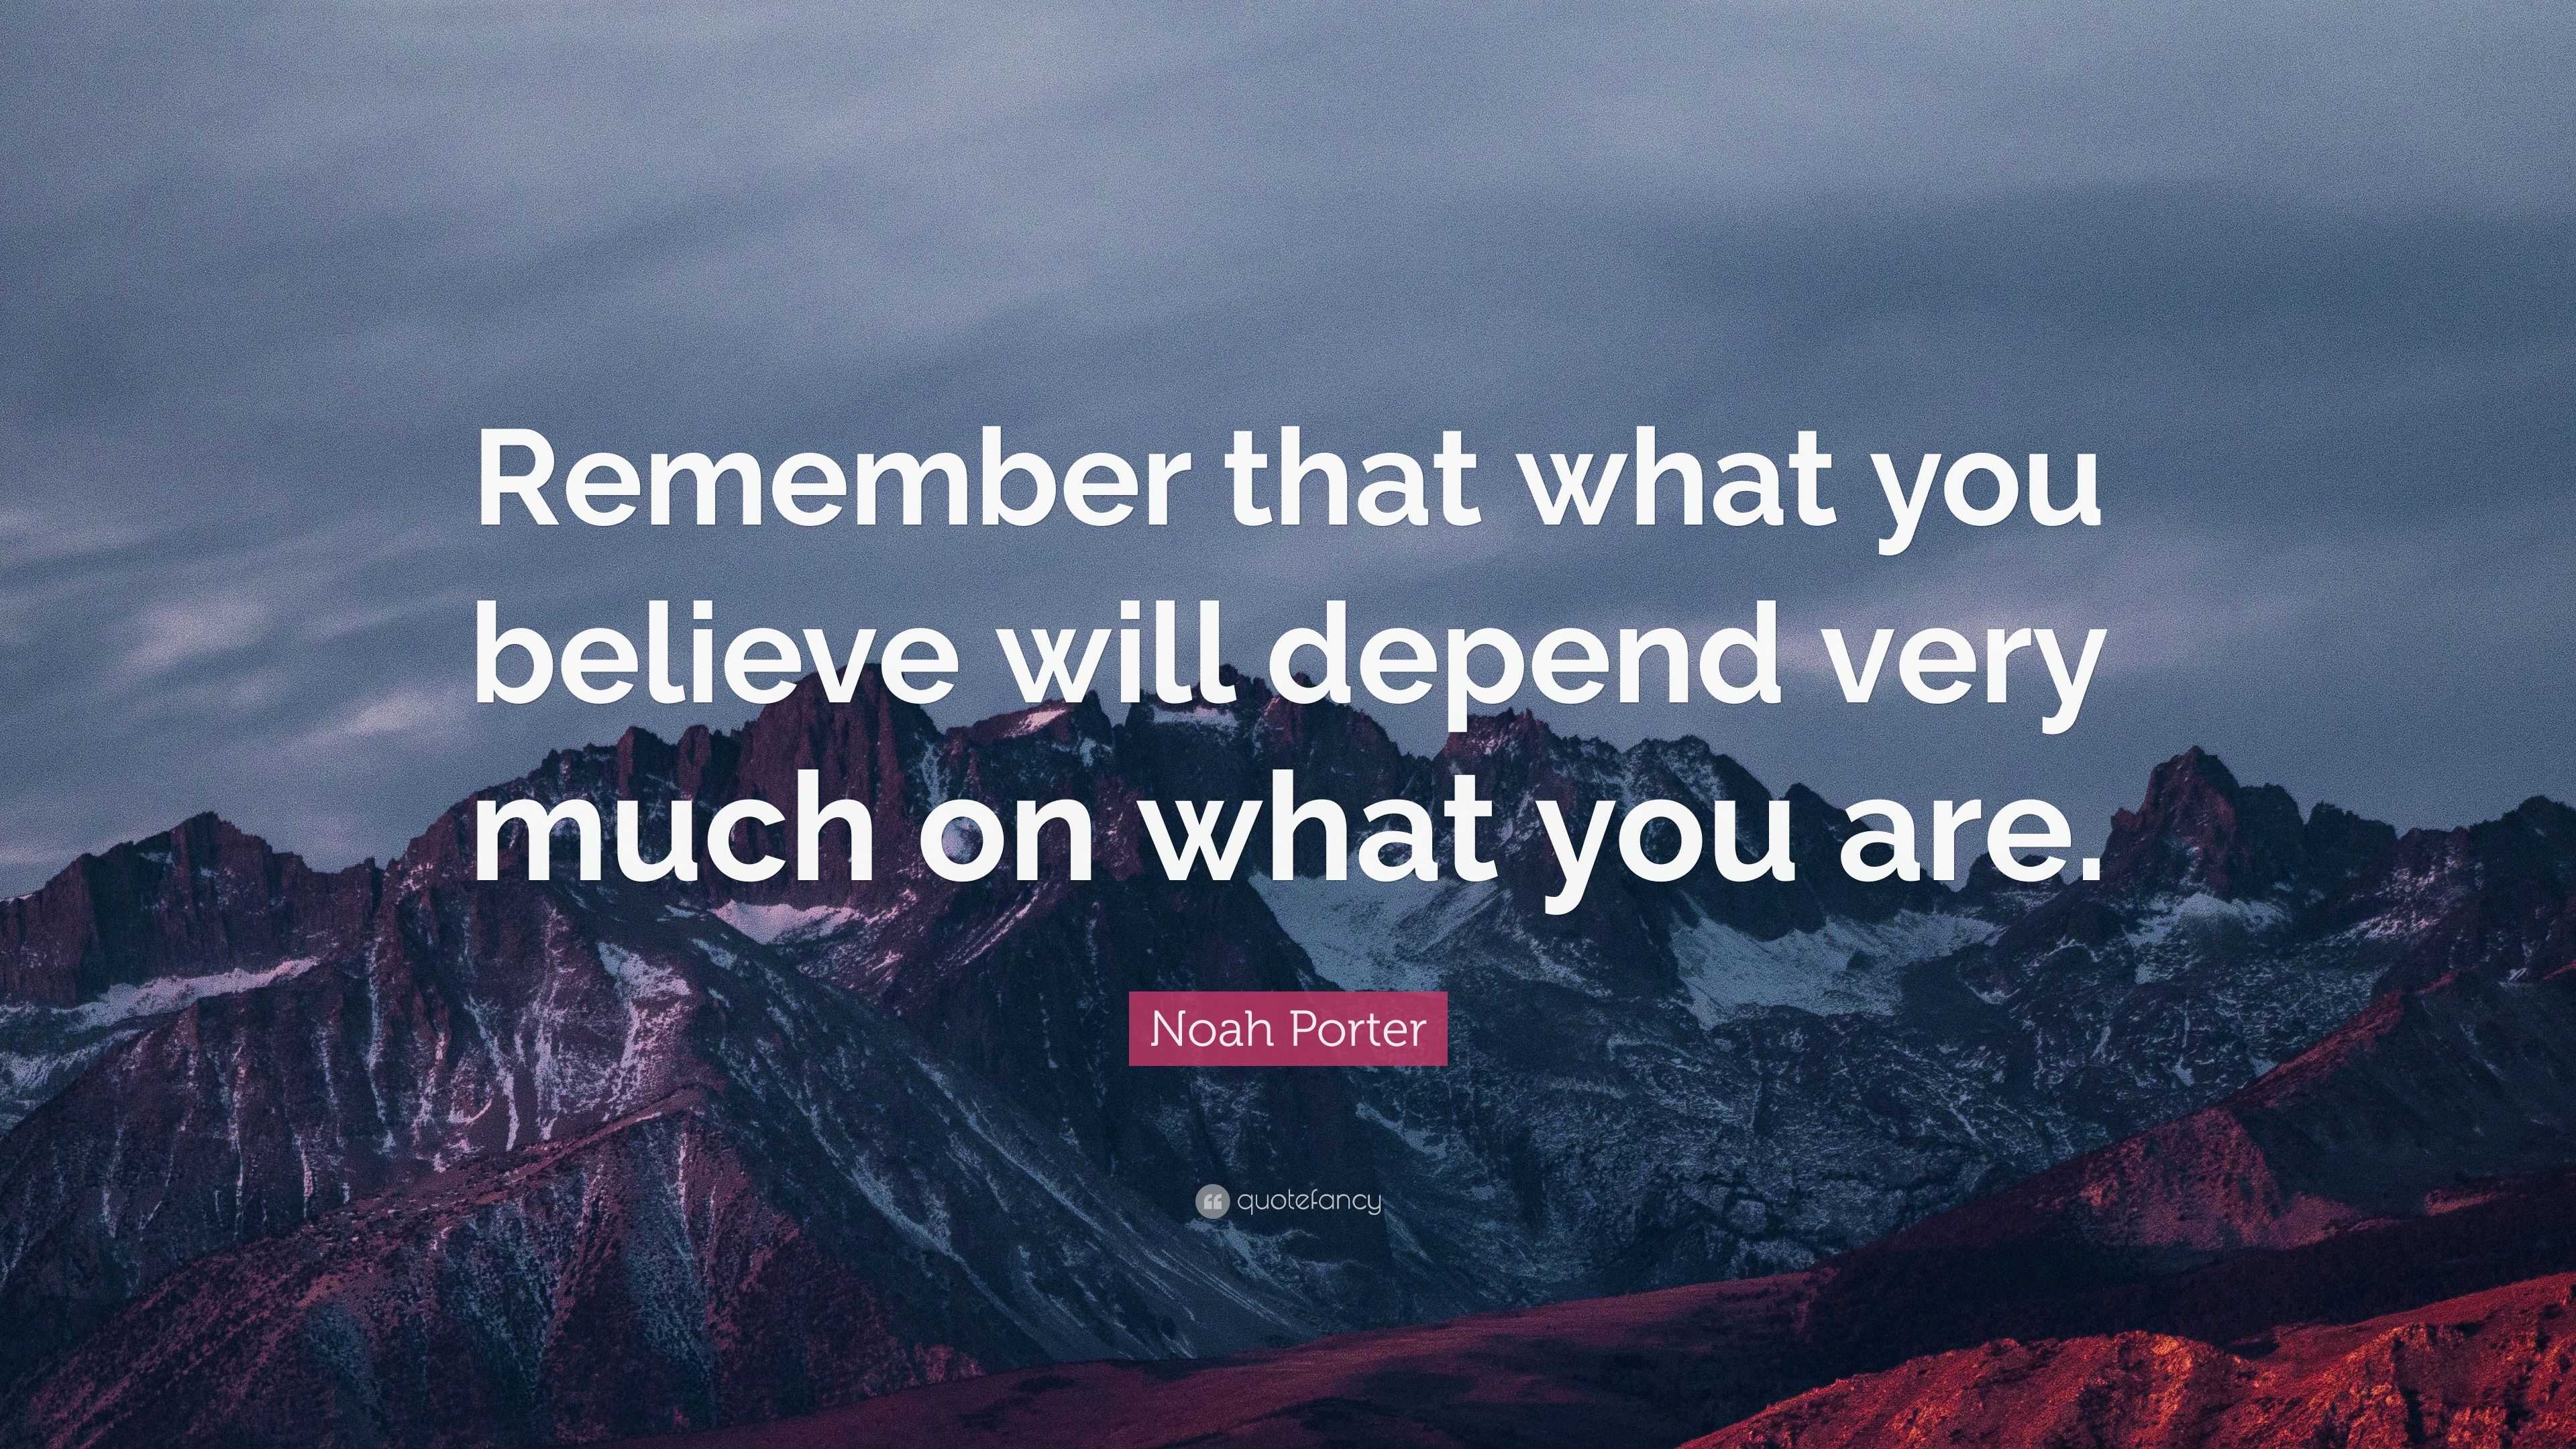 Noah Porter Quote: “Remember that what you believe will depend very ...